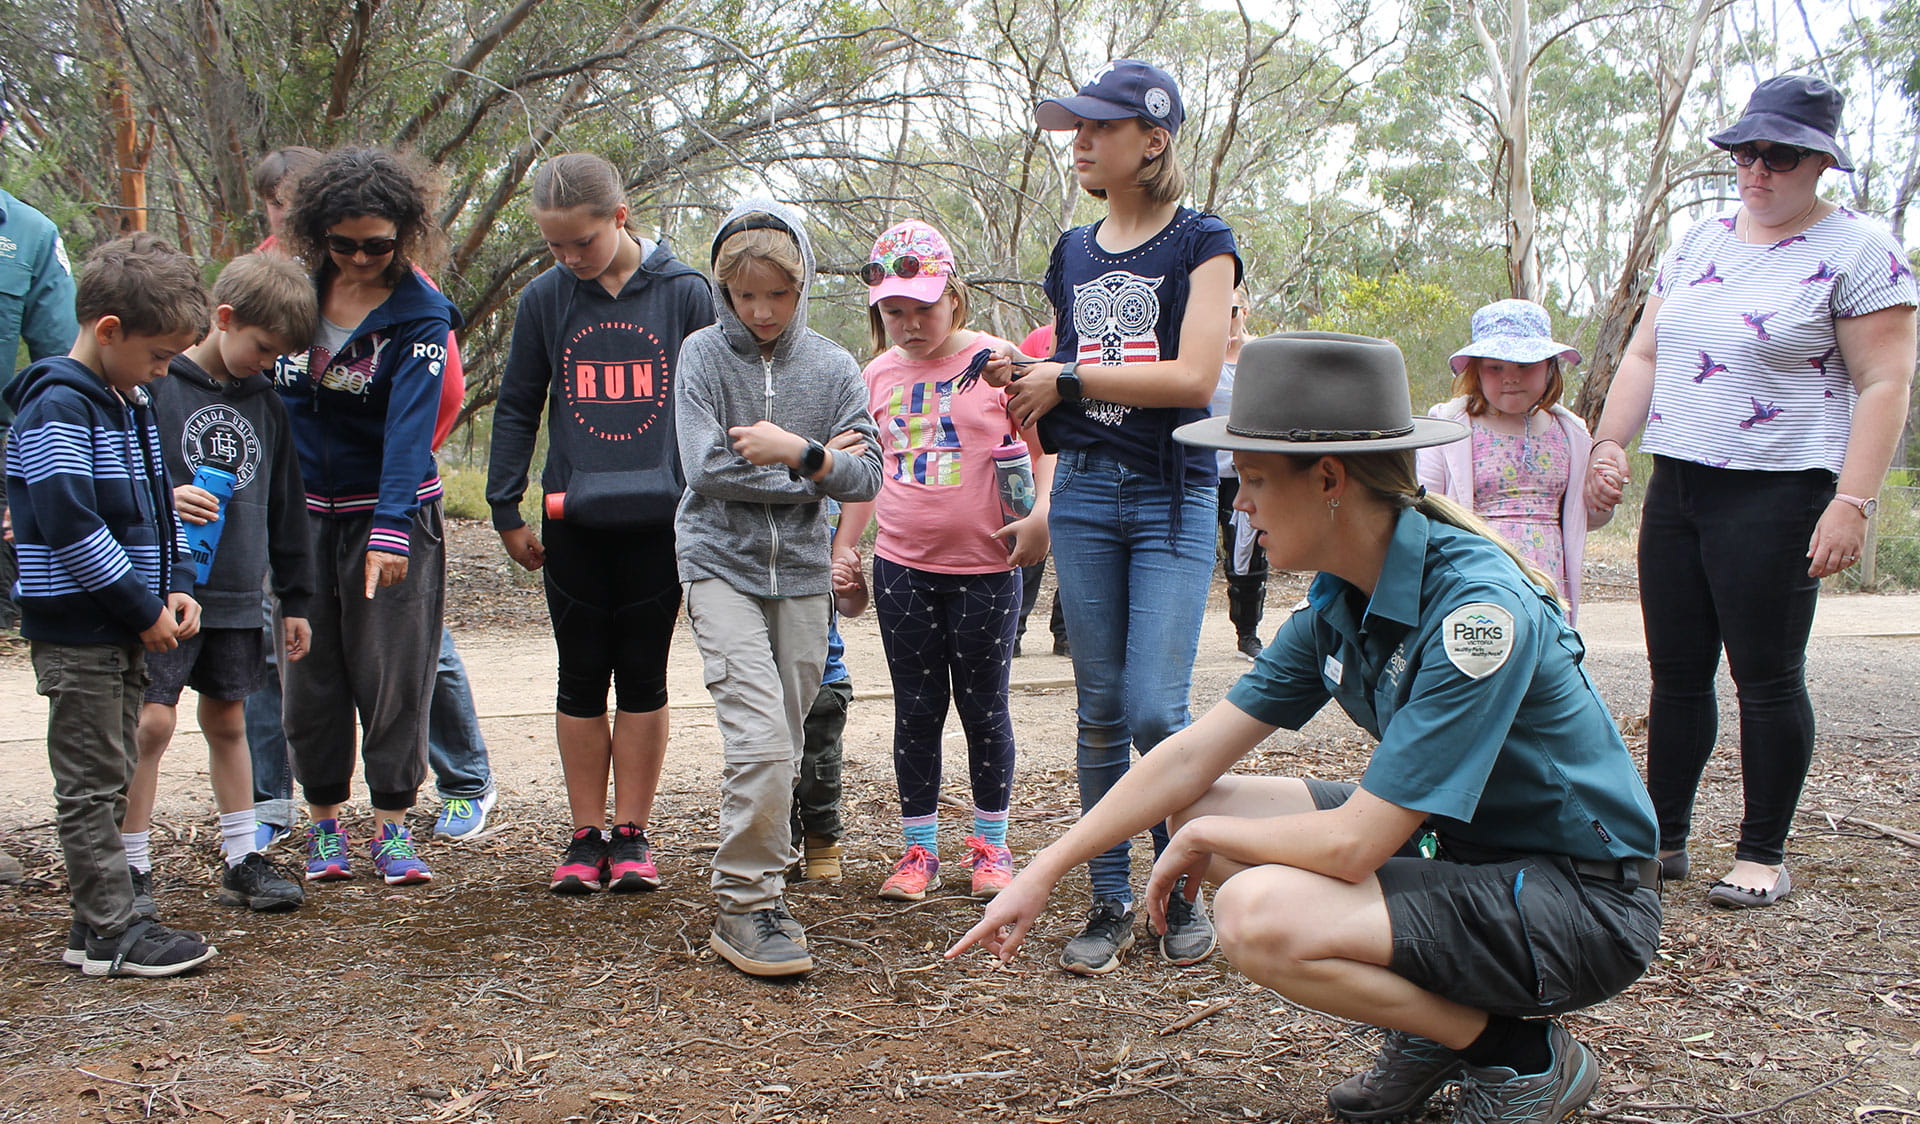 A ranger pointing at the ground, teaching a group of children and adults